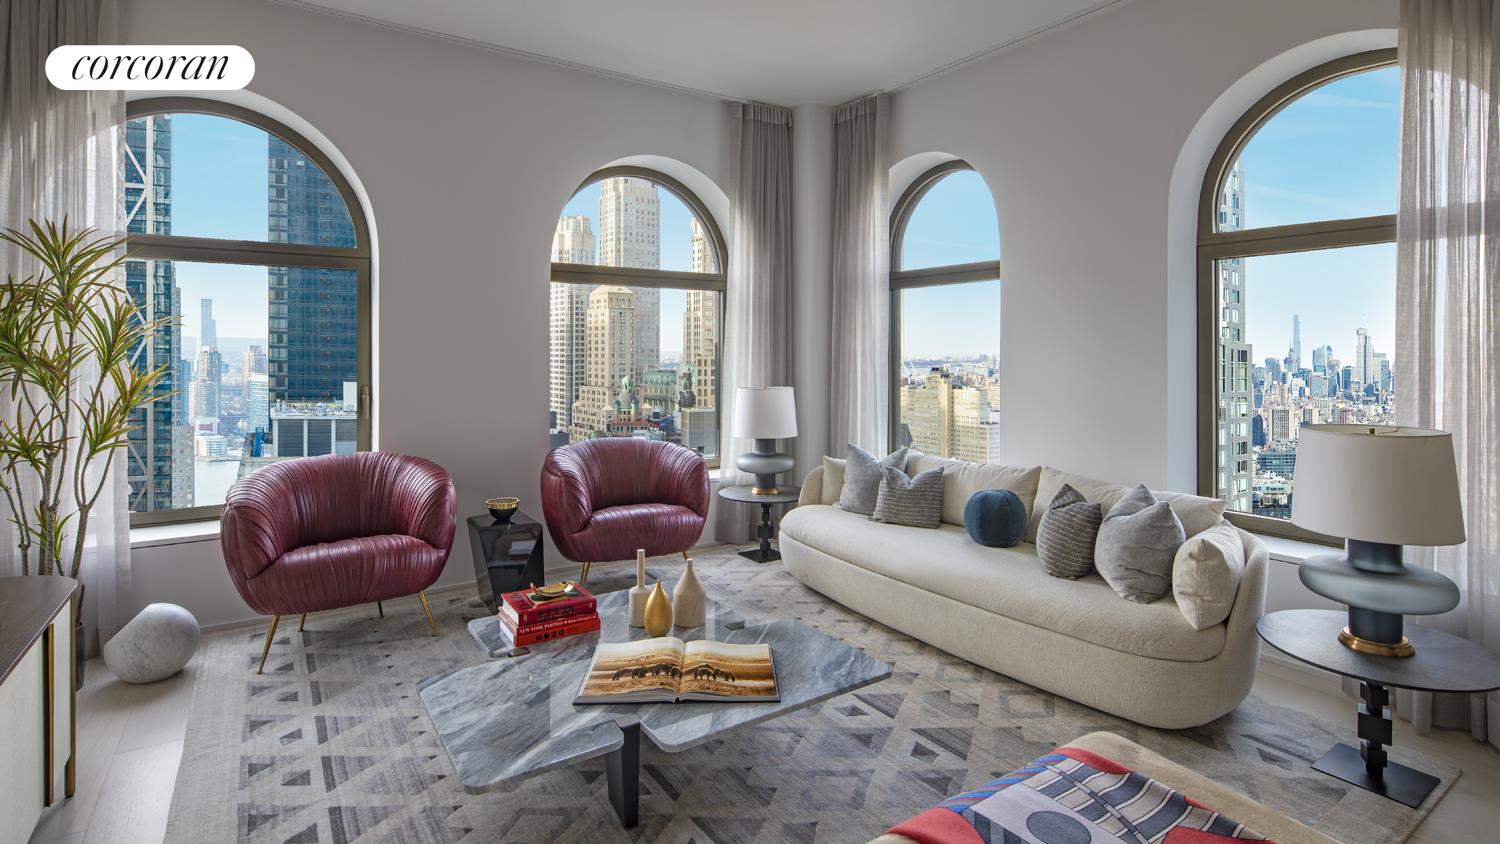 130 William Street 43C, Lower Manhattan, Downtown, NYC - 3 Bedrooms  
3 Bathrooms  
5 Rooms - 